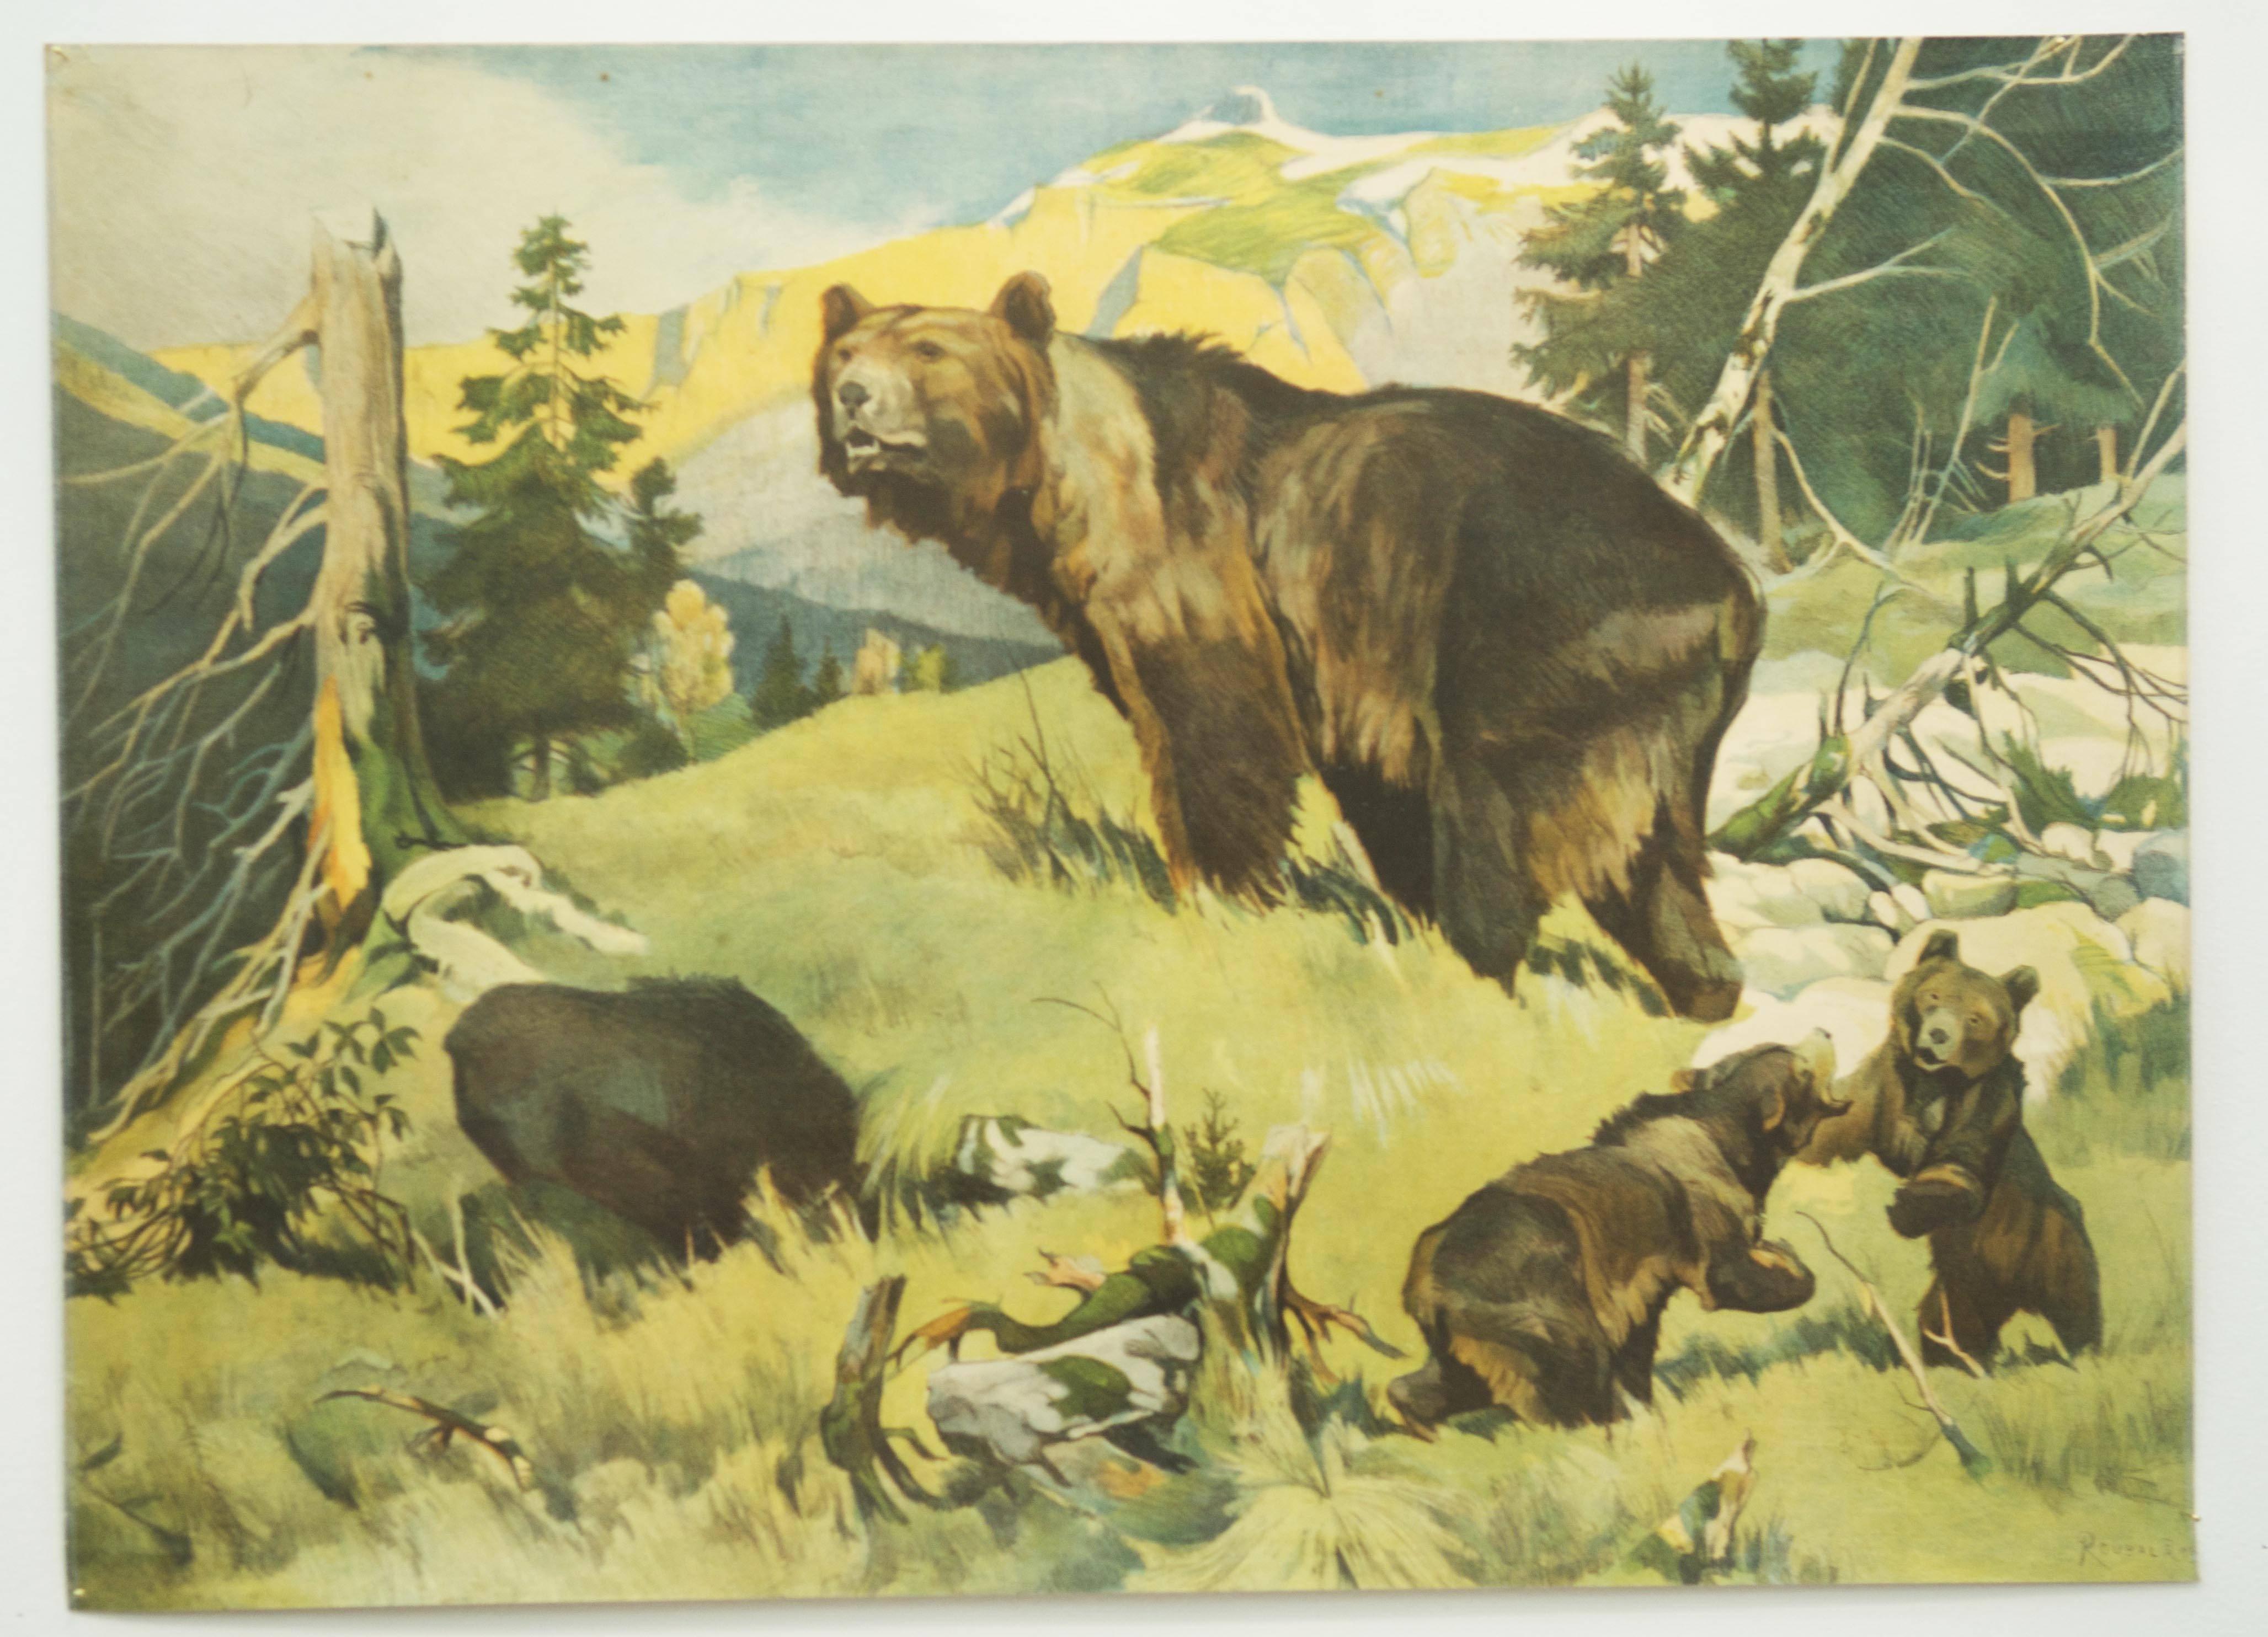 Great old wall chart depicting "bears family." The chart is drawn by Franz Roubal in the 1930s and published as school wall chart by Leipziger Schulbildverlag. Colorful print on paper.
Good original condition, age-related traces of usage,